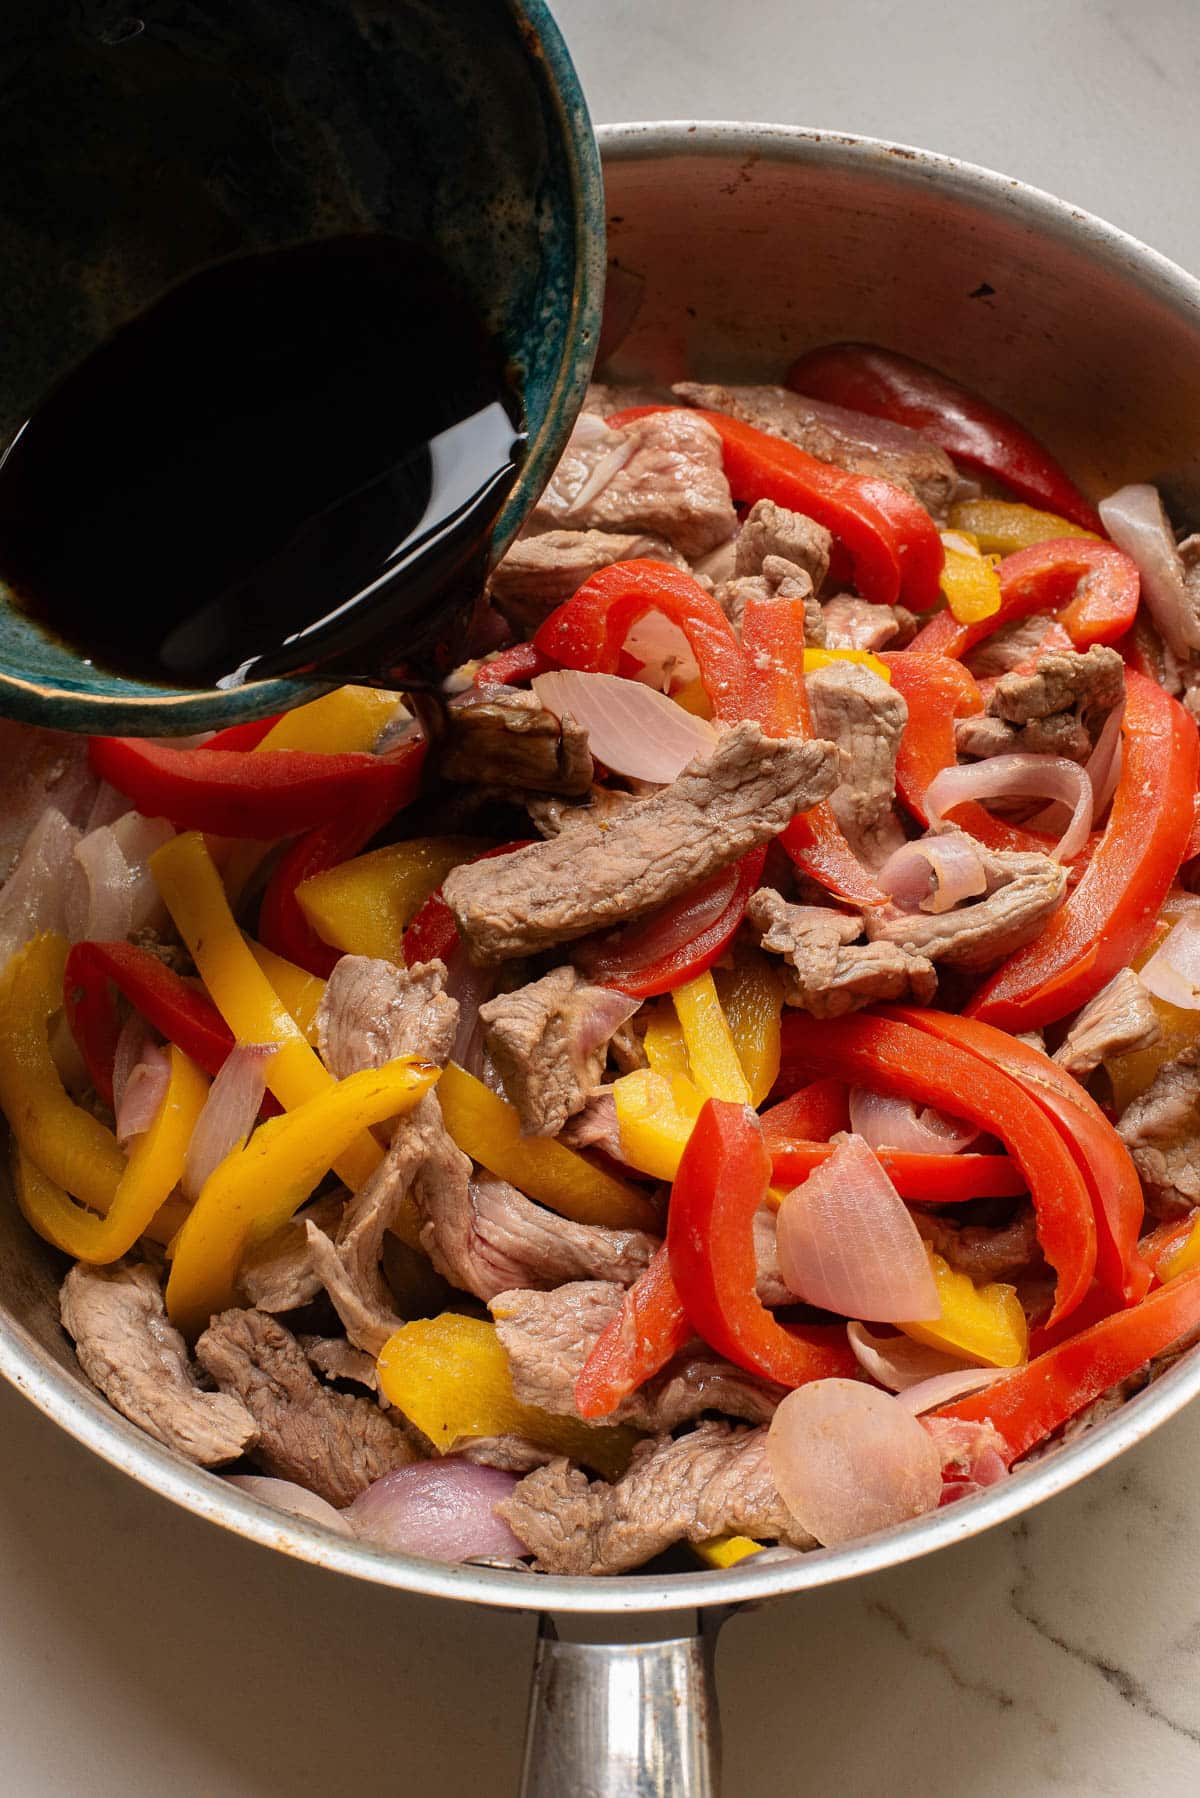 Steak, peppers, and onion, with sauce pouring over.